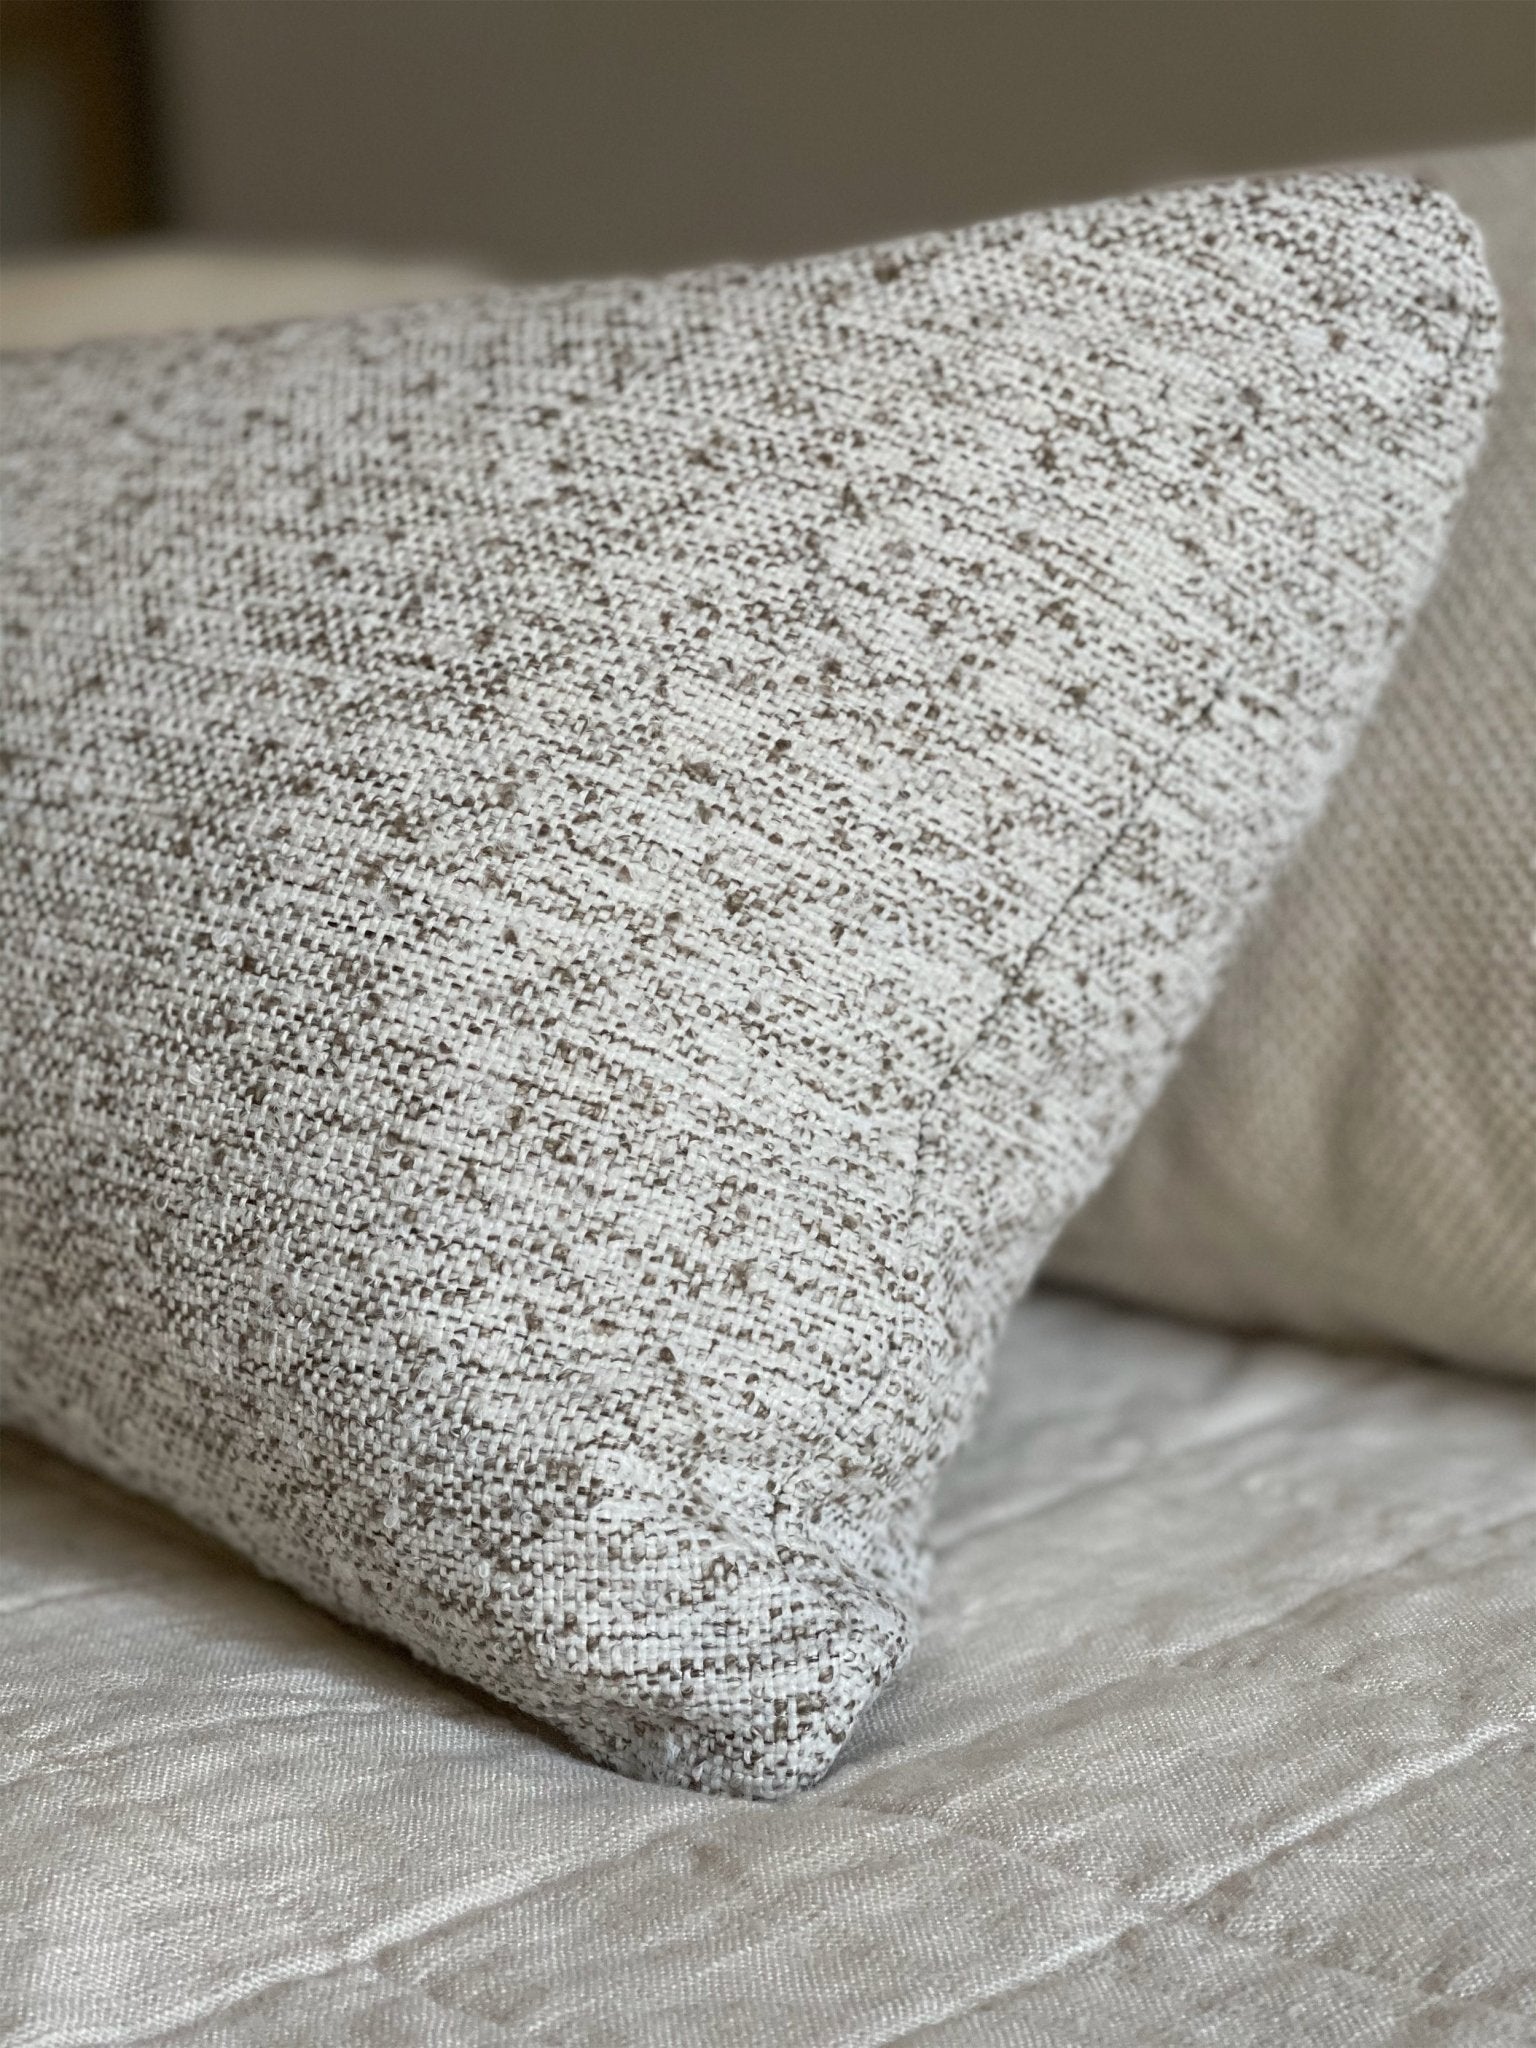 A detailed view of the brown speckled boucle throw pillow cover showing its craftsmanship at Cielle Home